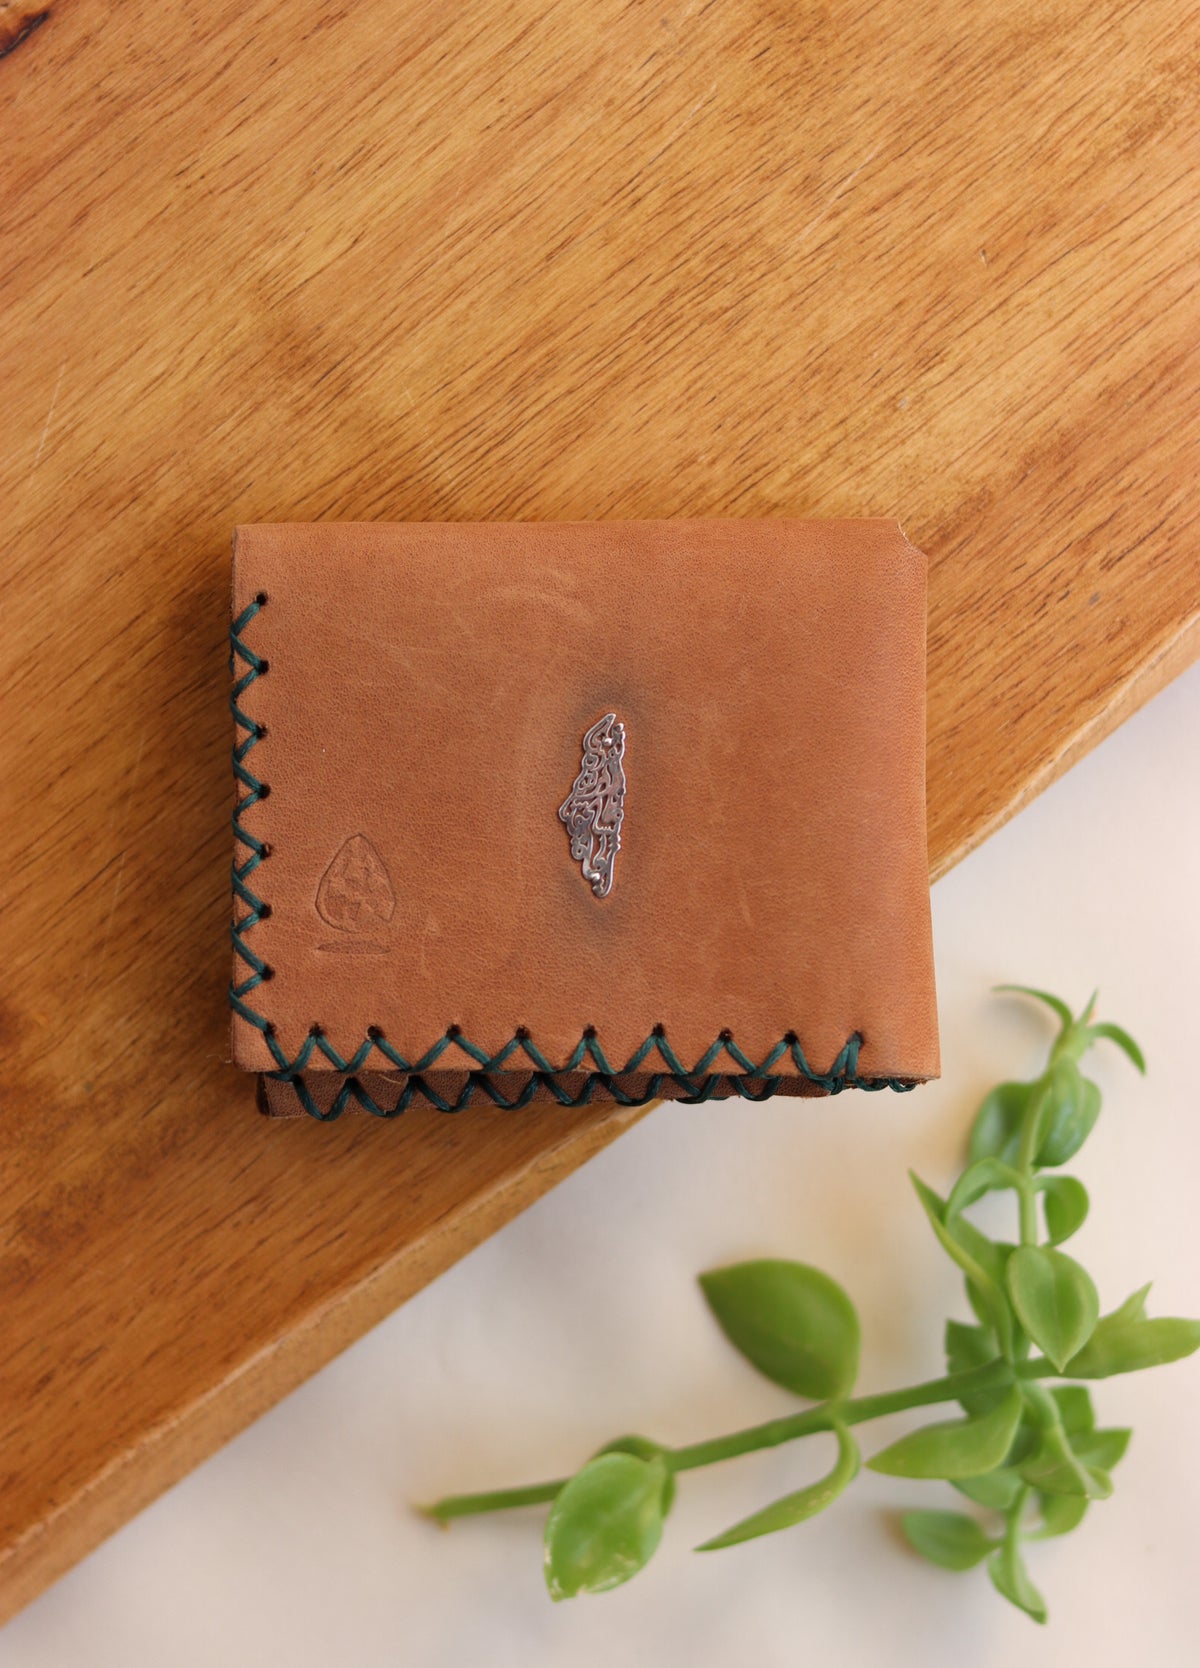 Palestine map with Palestinian famous poem written inside foldable leather wallet